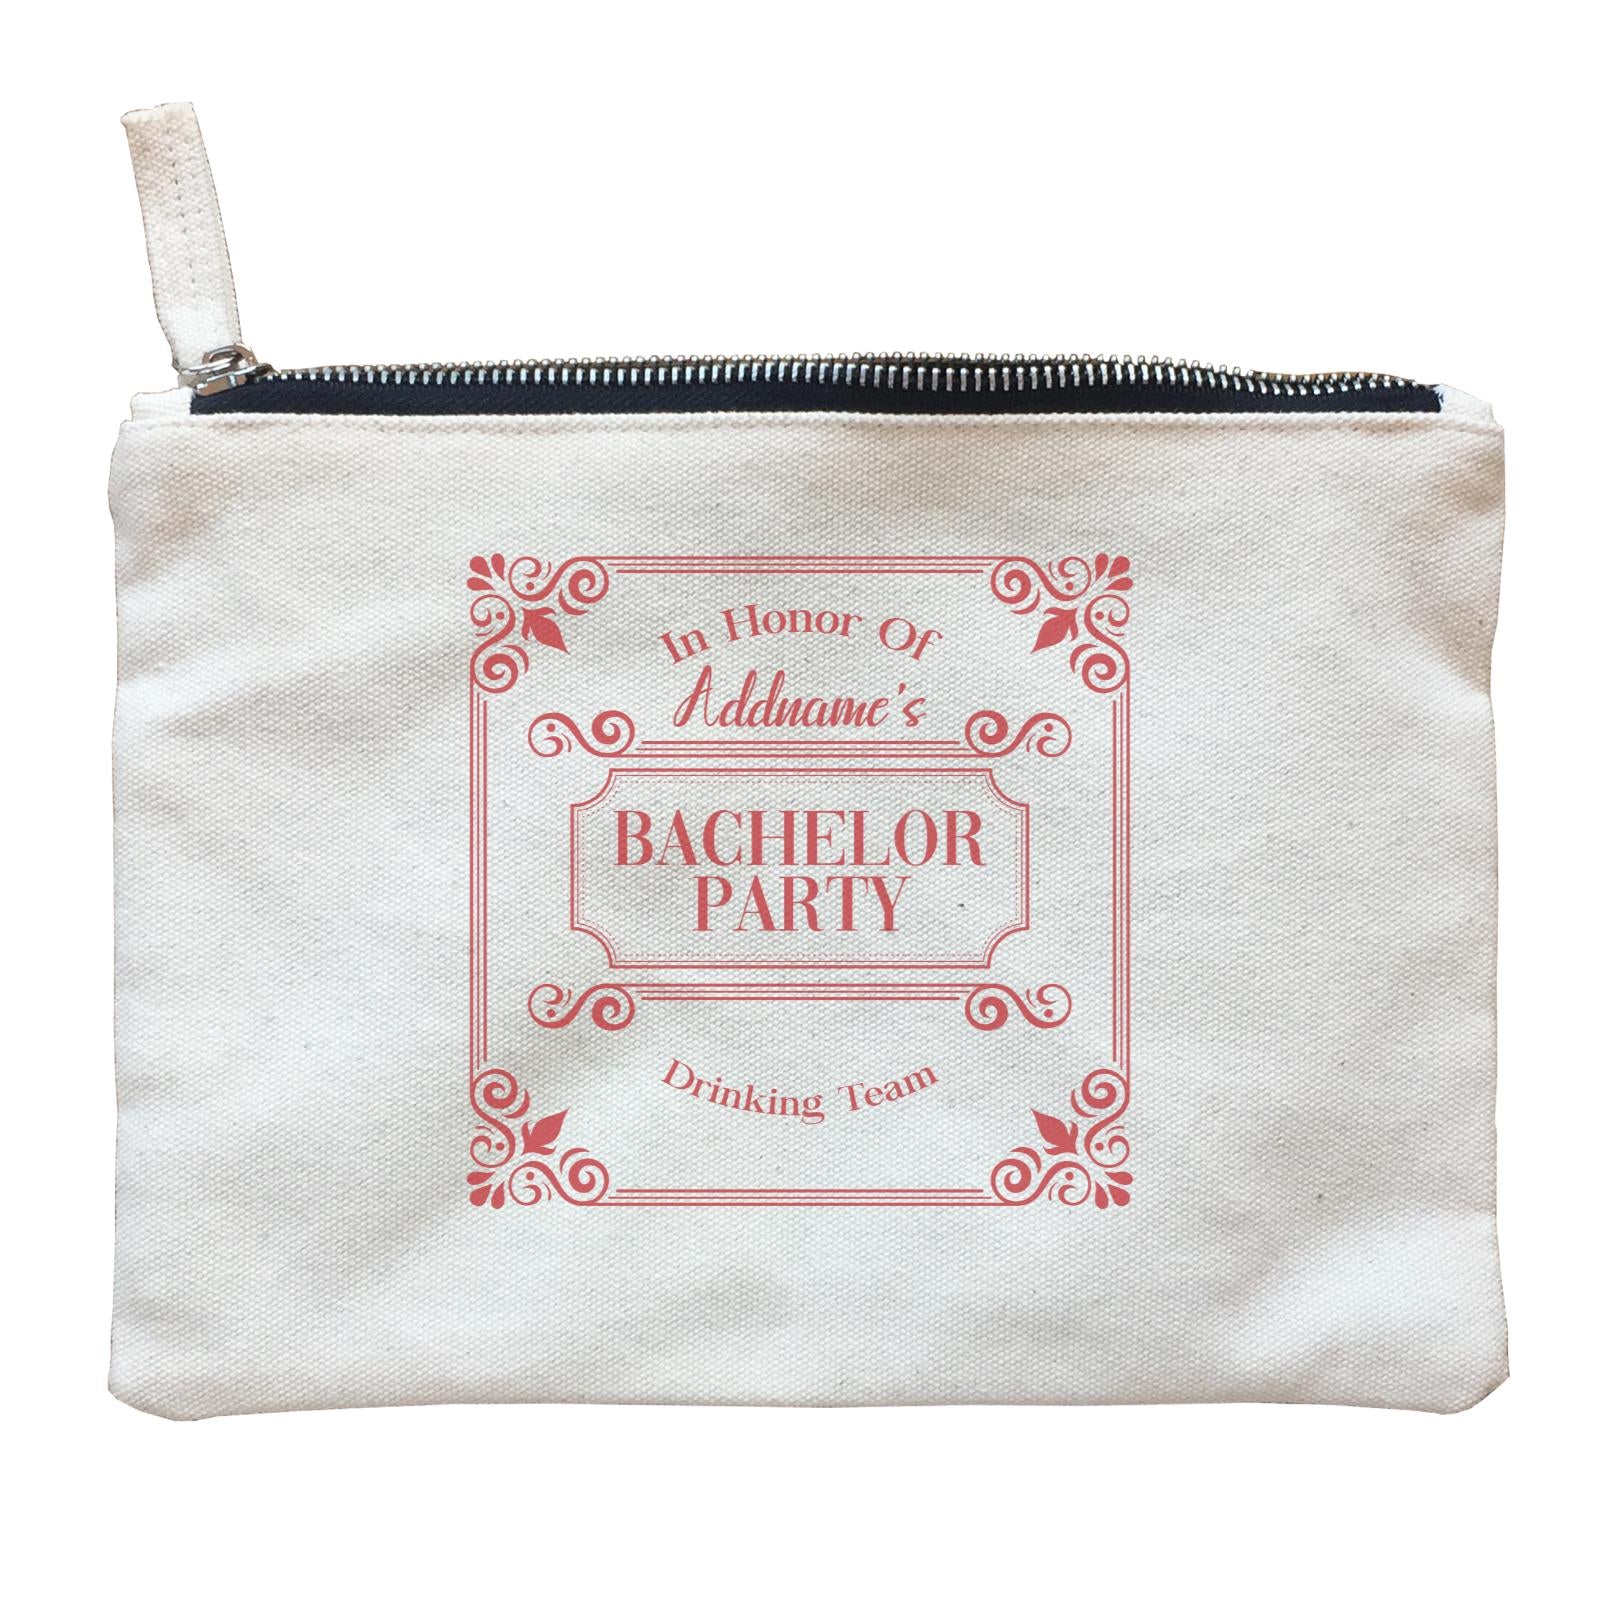 In Honor Of Bachelor Party Drinking Team Addname Zipper Pouch